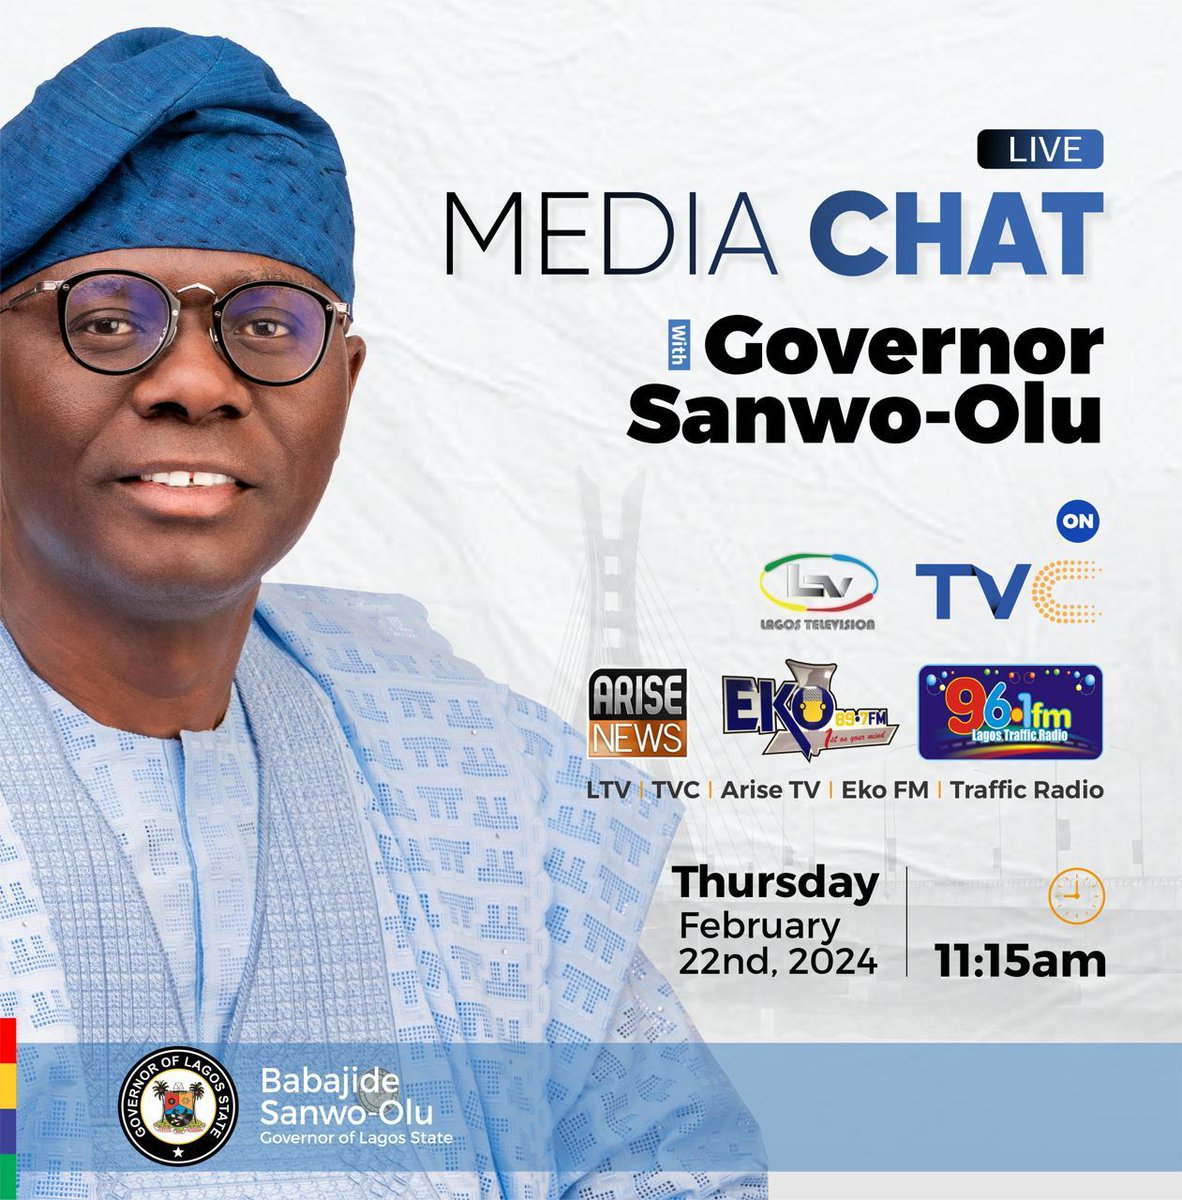 Live Media Chat with Governor Babajide Sanwoolu 
Please join us for an engaging discussion as we delve into the progress and future plans for Lagos State with the Governor of Lagos State 
Tune in for a glimpse into the vision for a 
#GreaterLagosRising
#SanwoOluSpeaks
#LagosCares